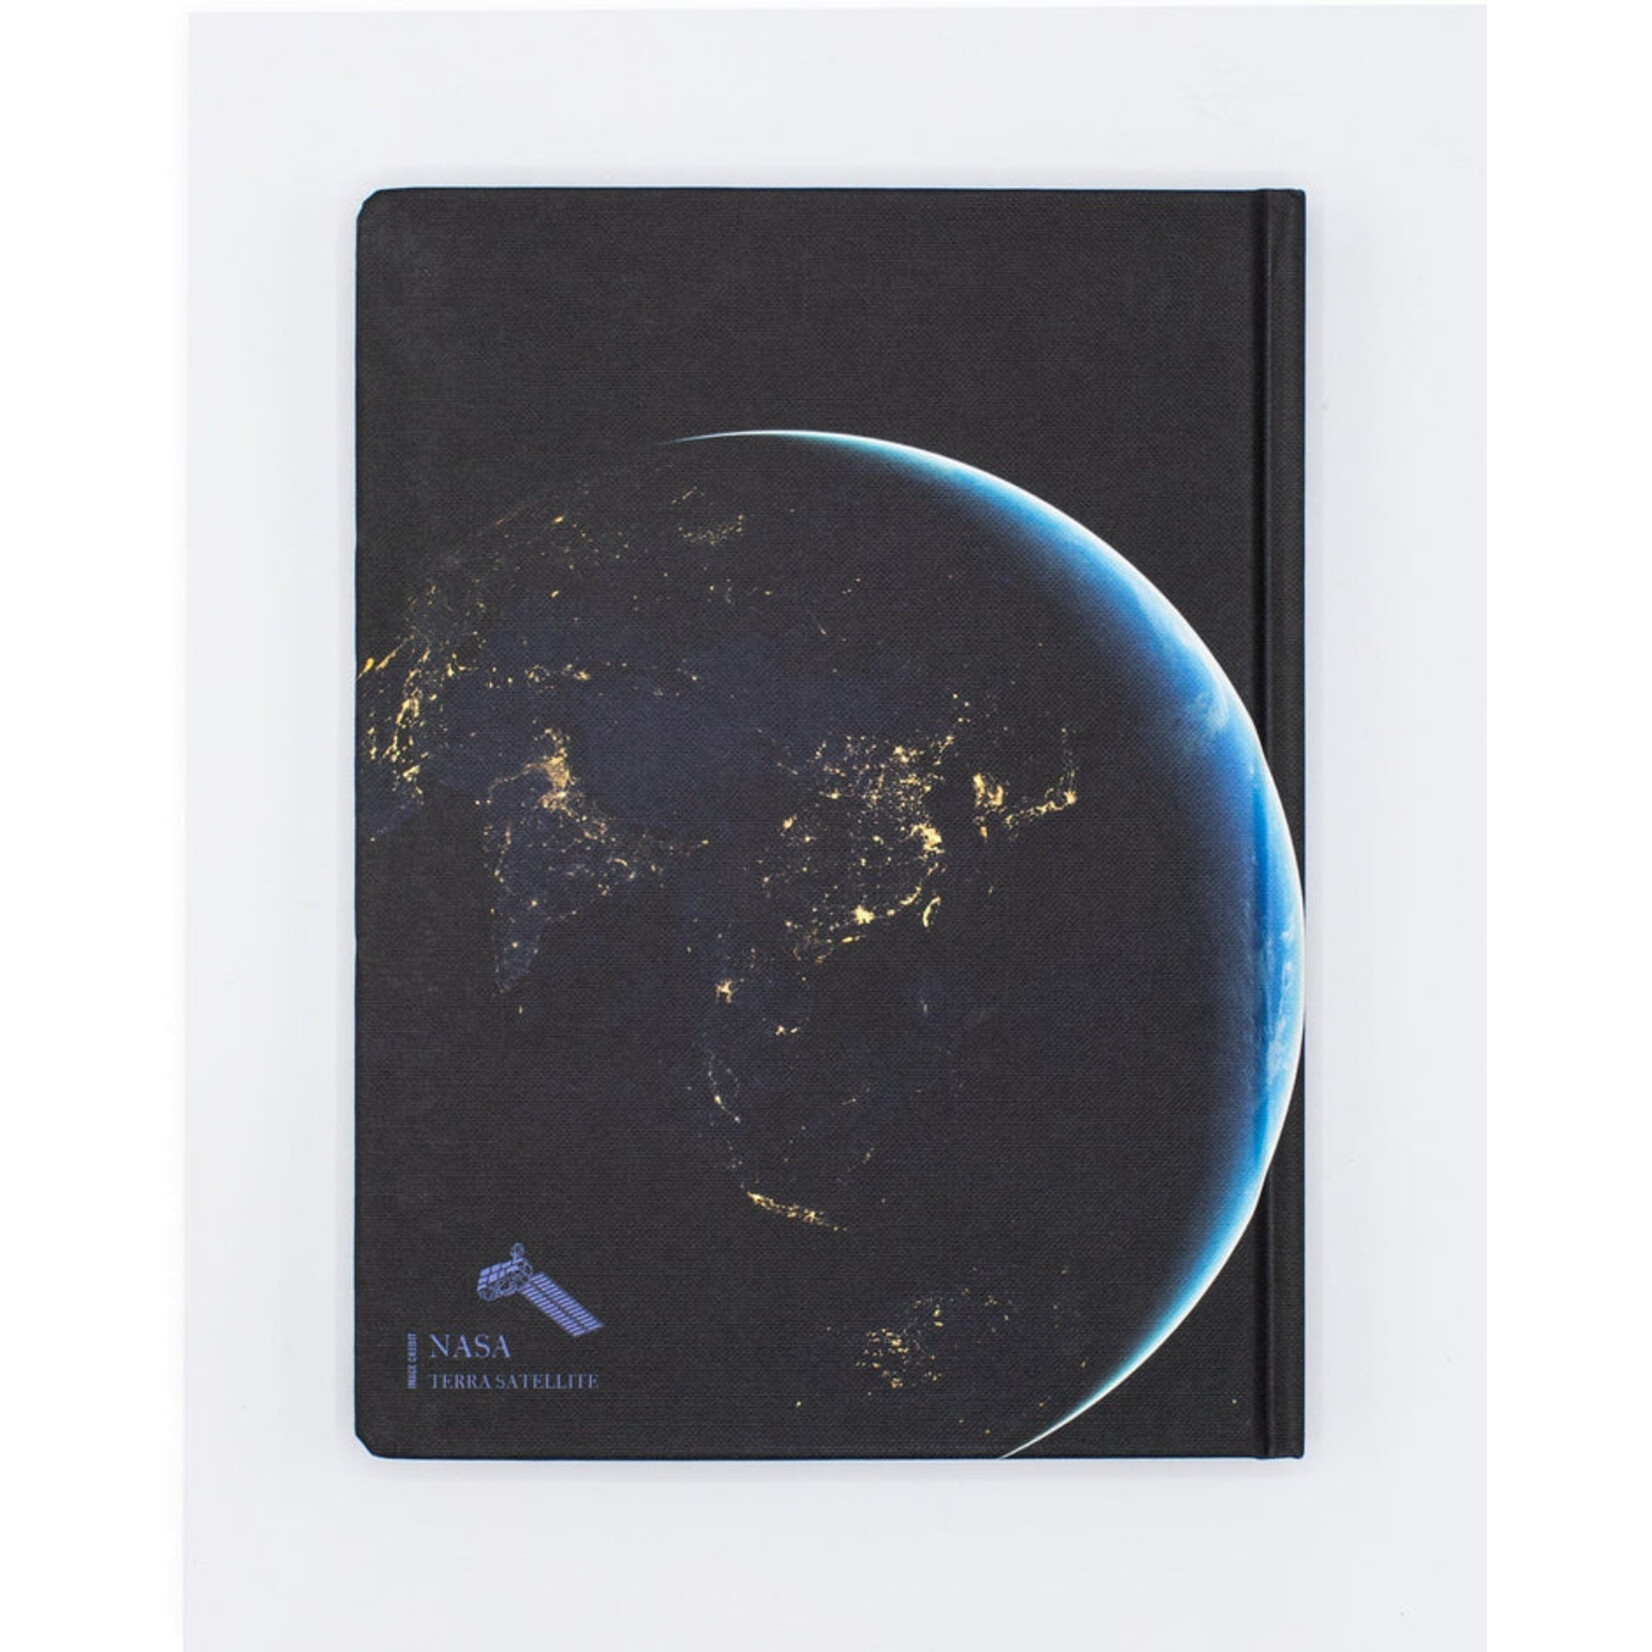 Cognitive Surplus Dot Grid Notebook - Night & Day on Earth